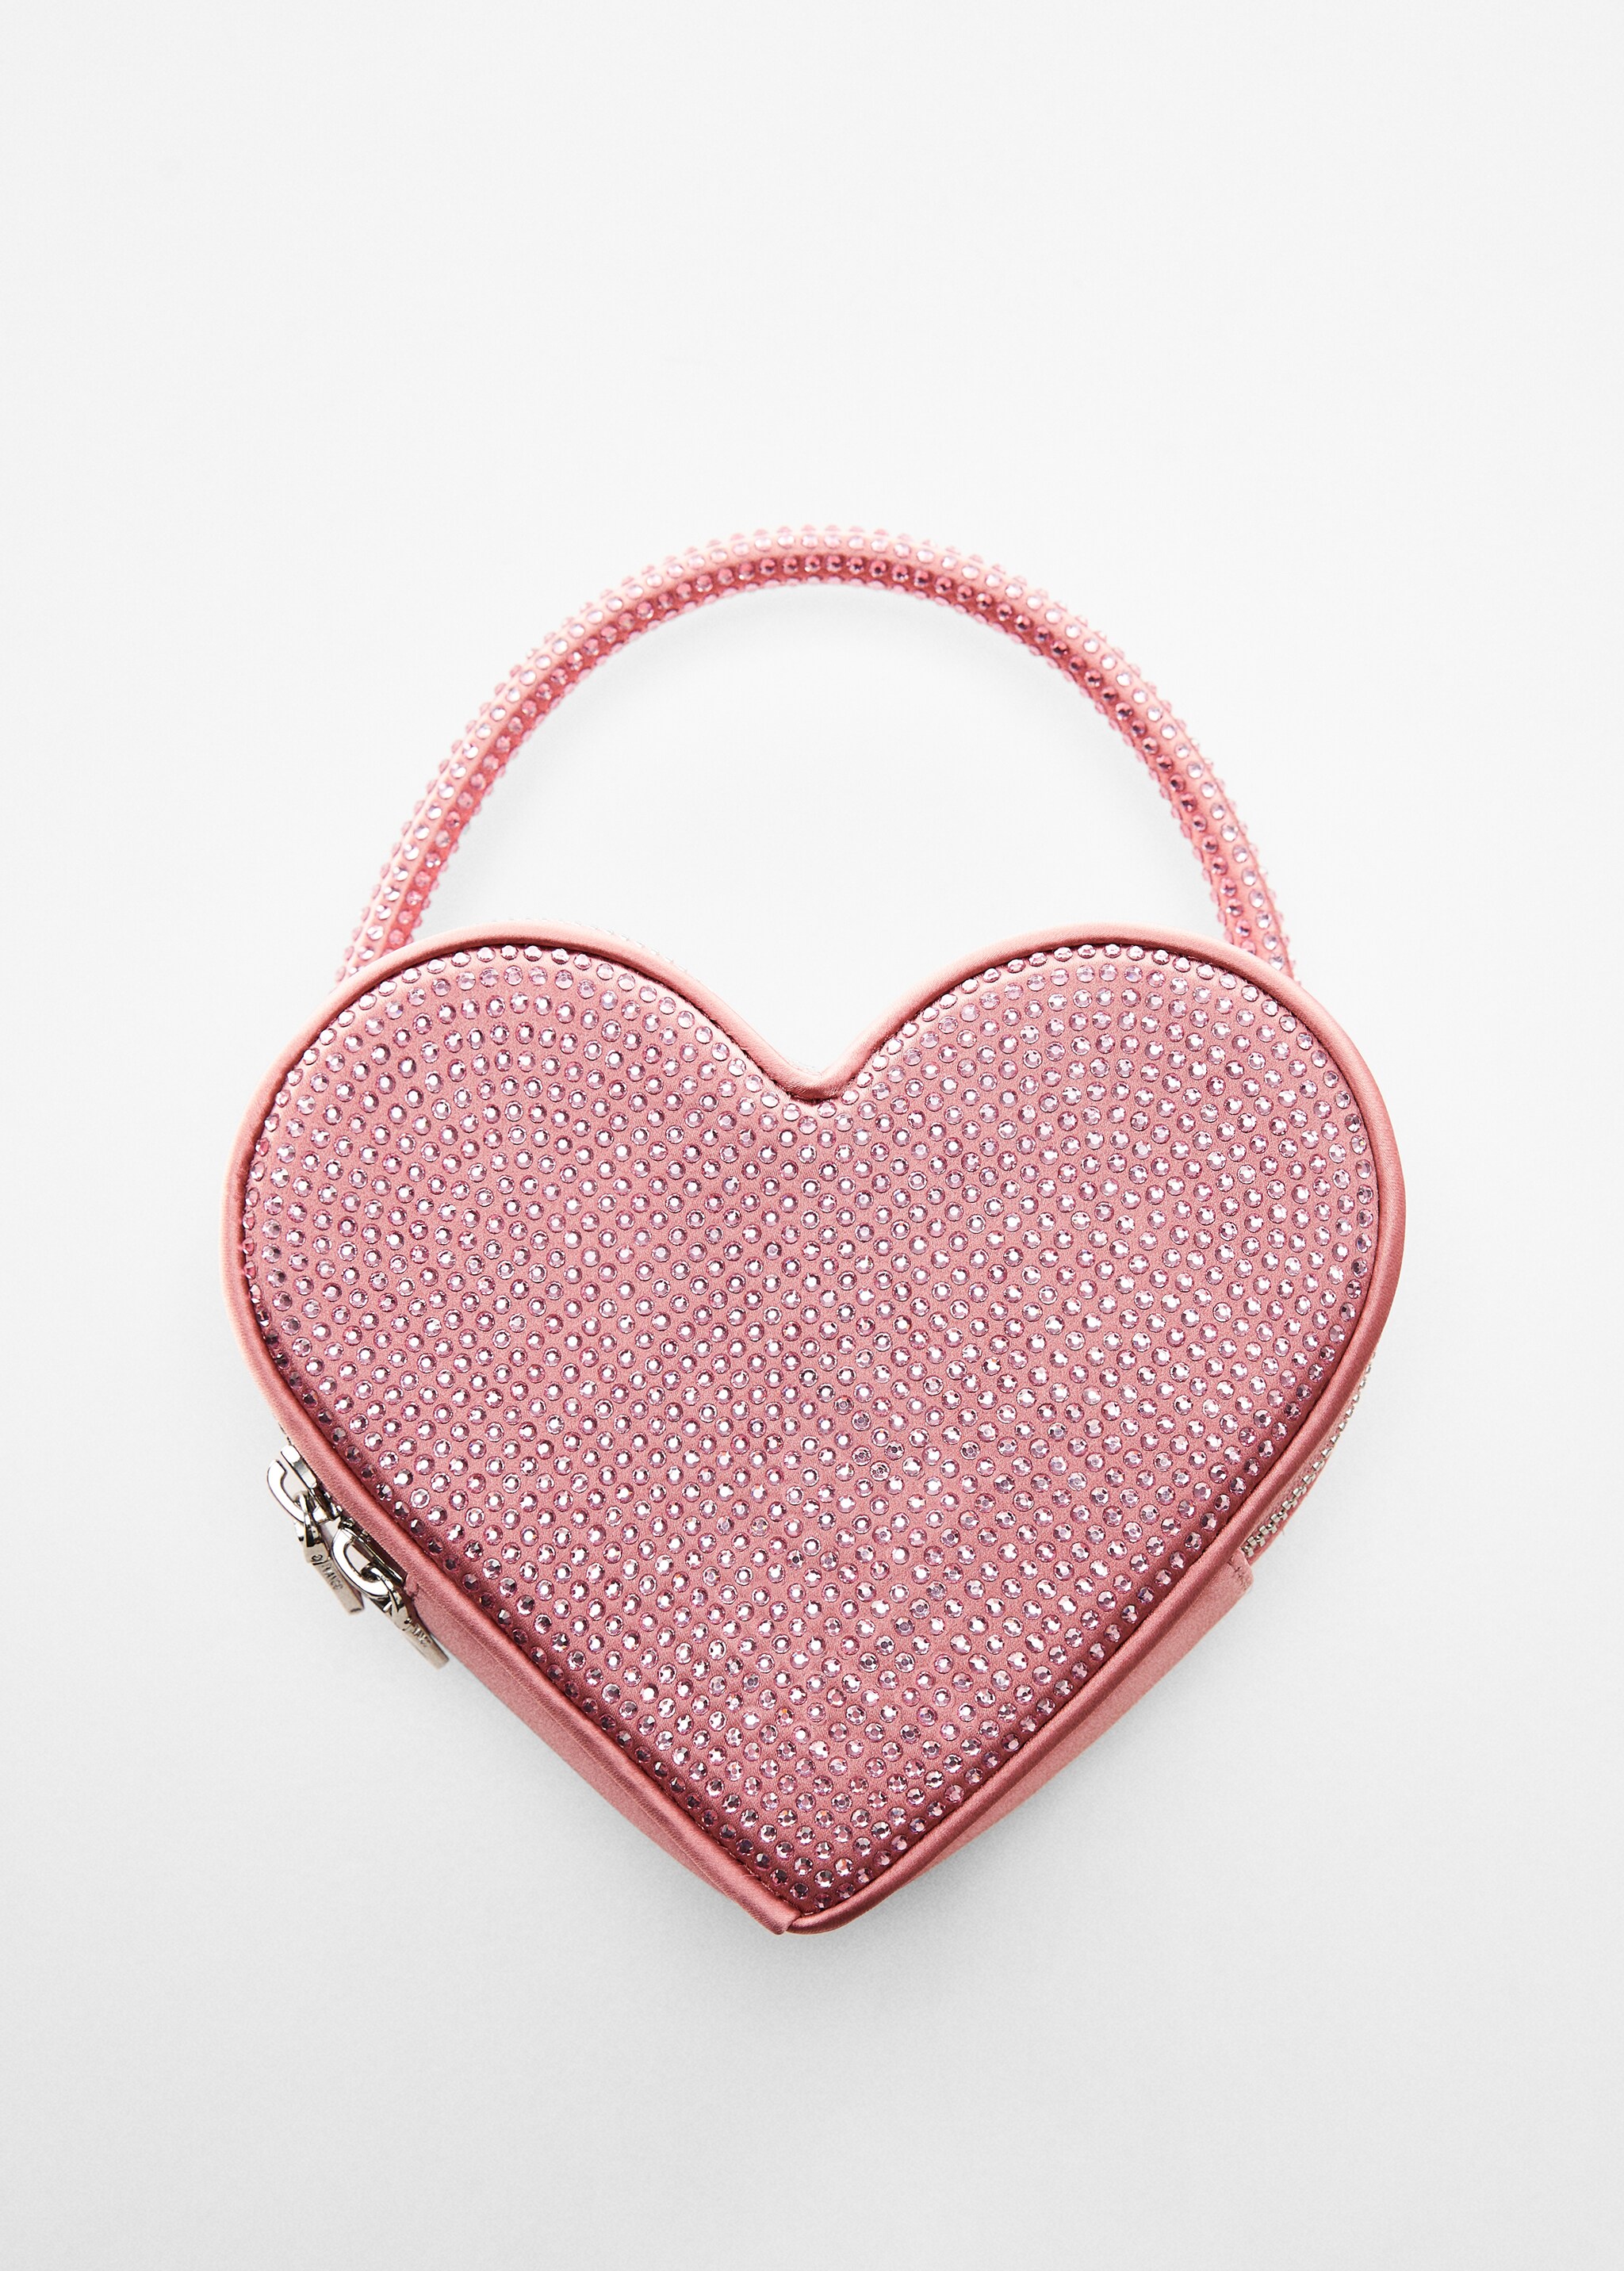 Crystal heart bag - Details of the article 5